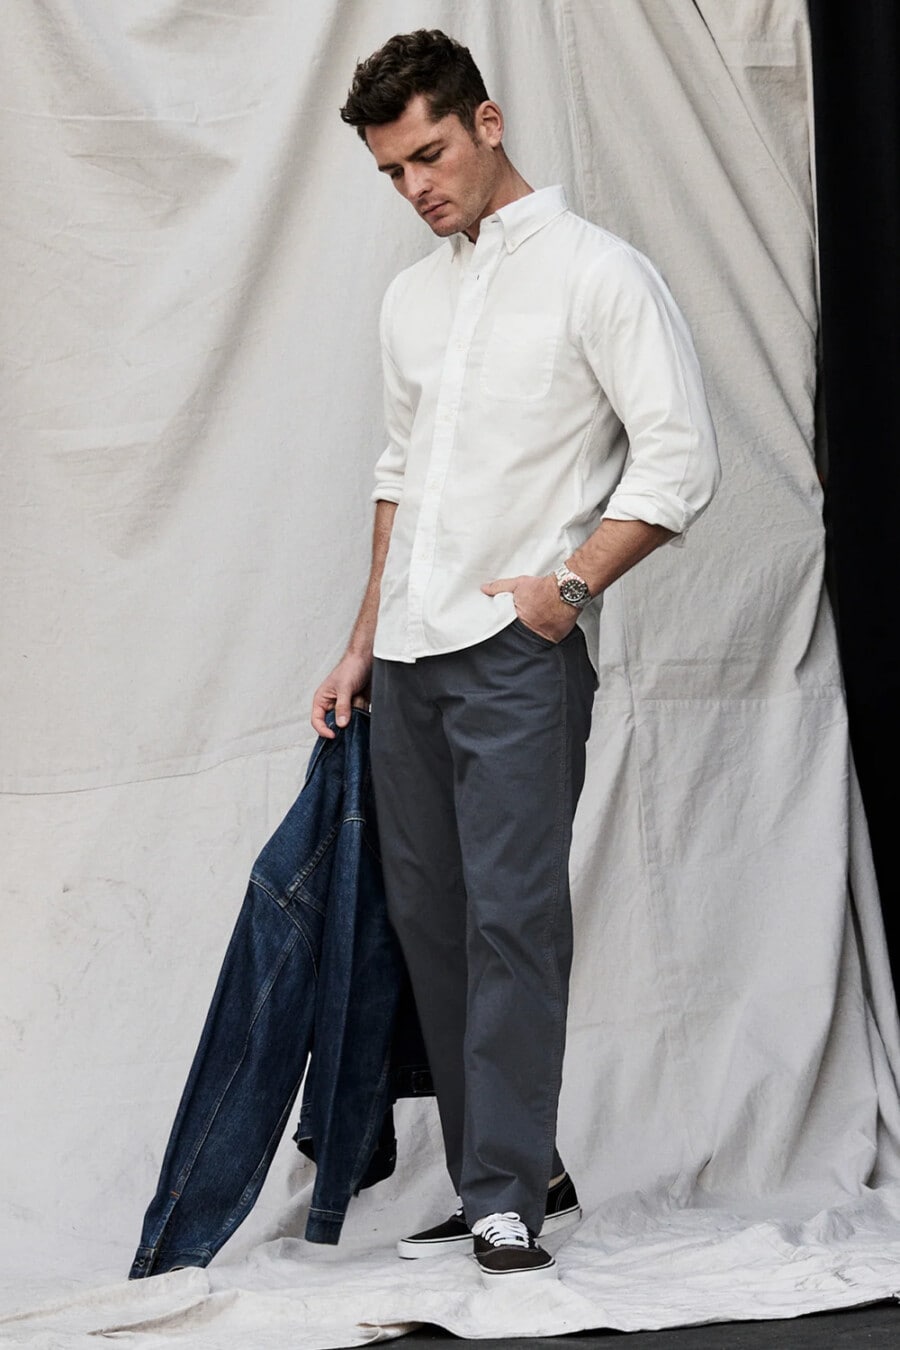 Men's straight navy chinos, white Oxford shirt, denim jacket and black Vans skate shoes outfit